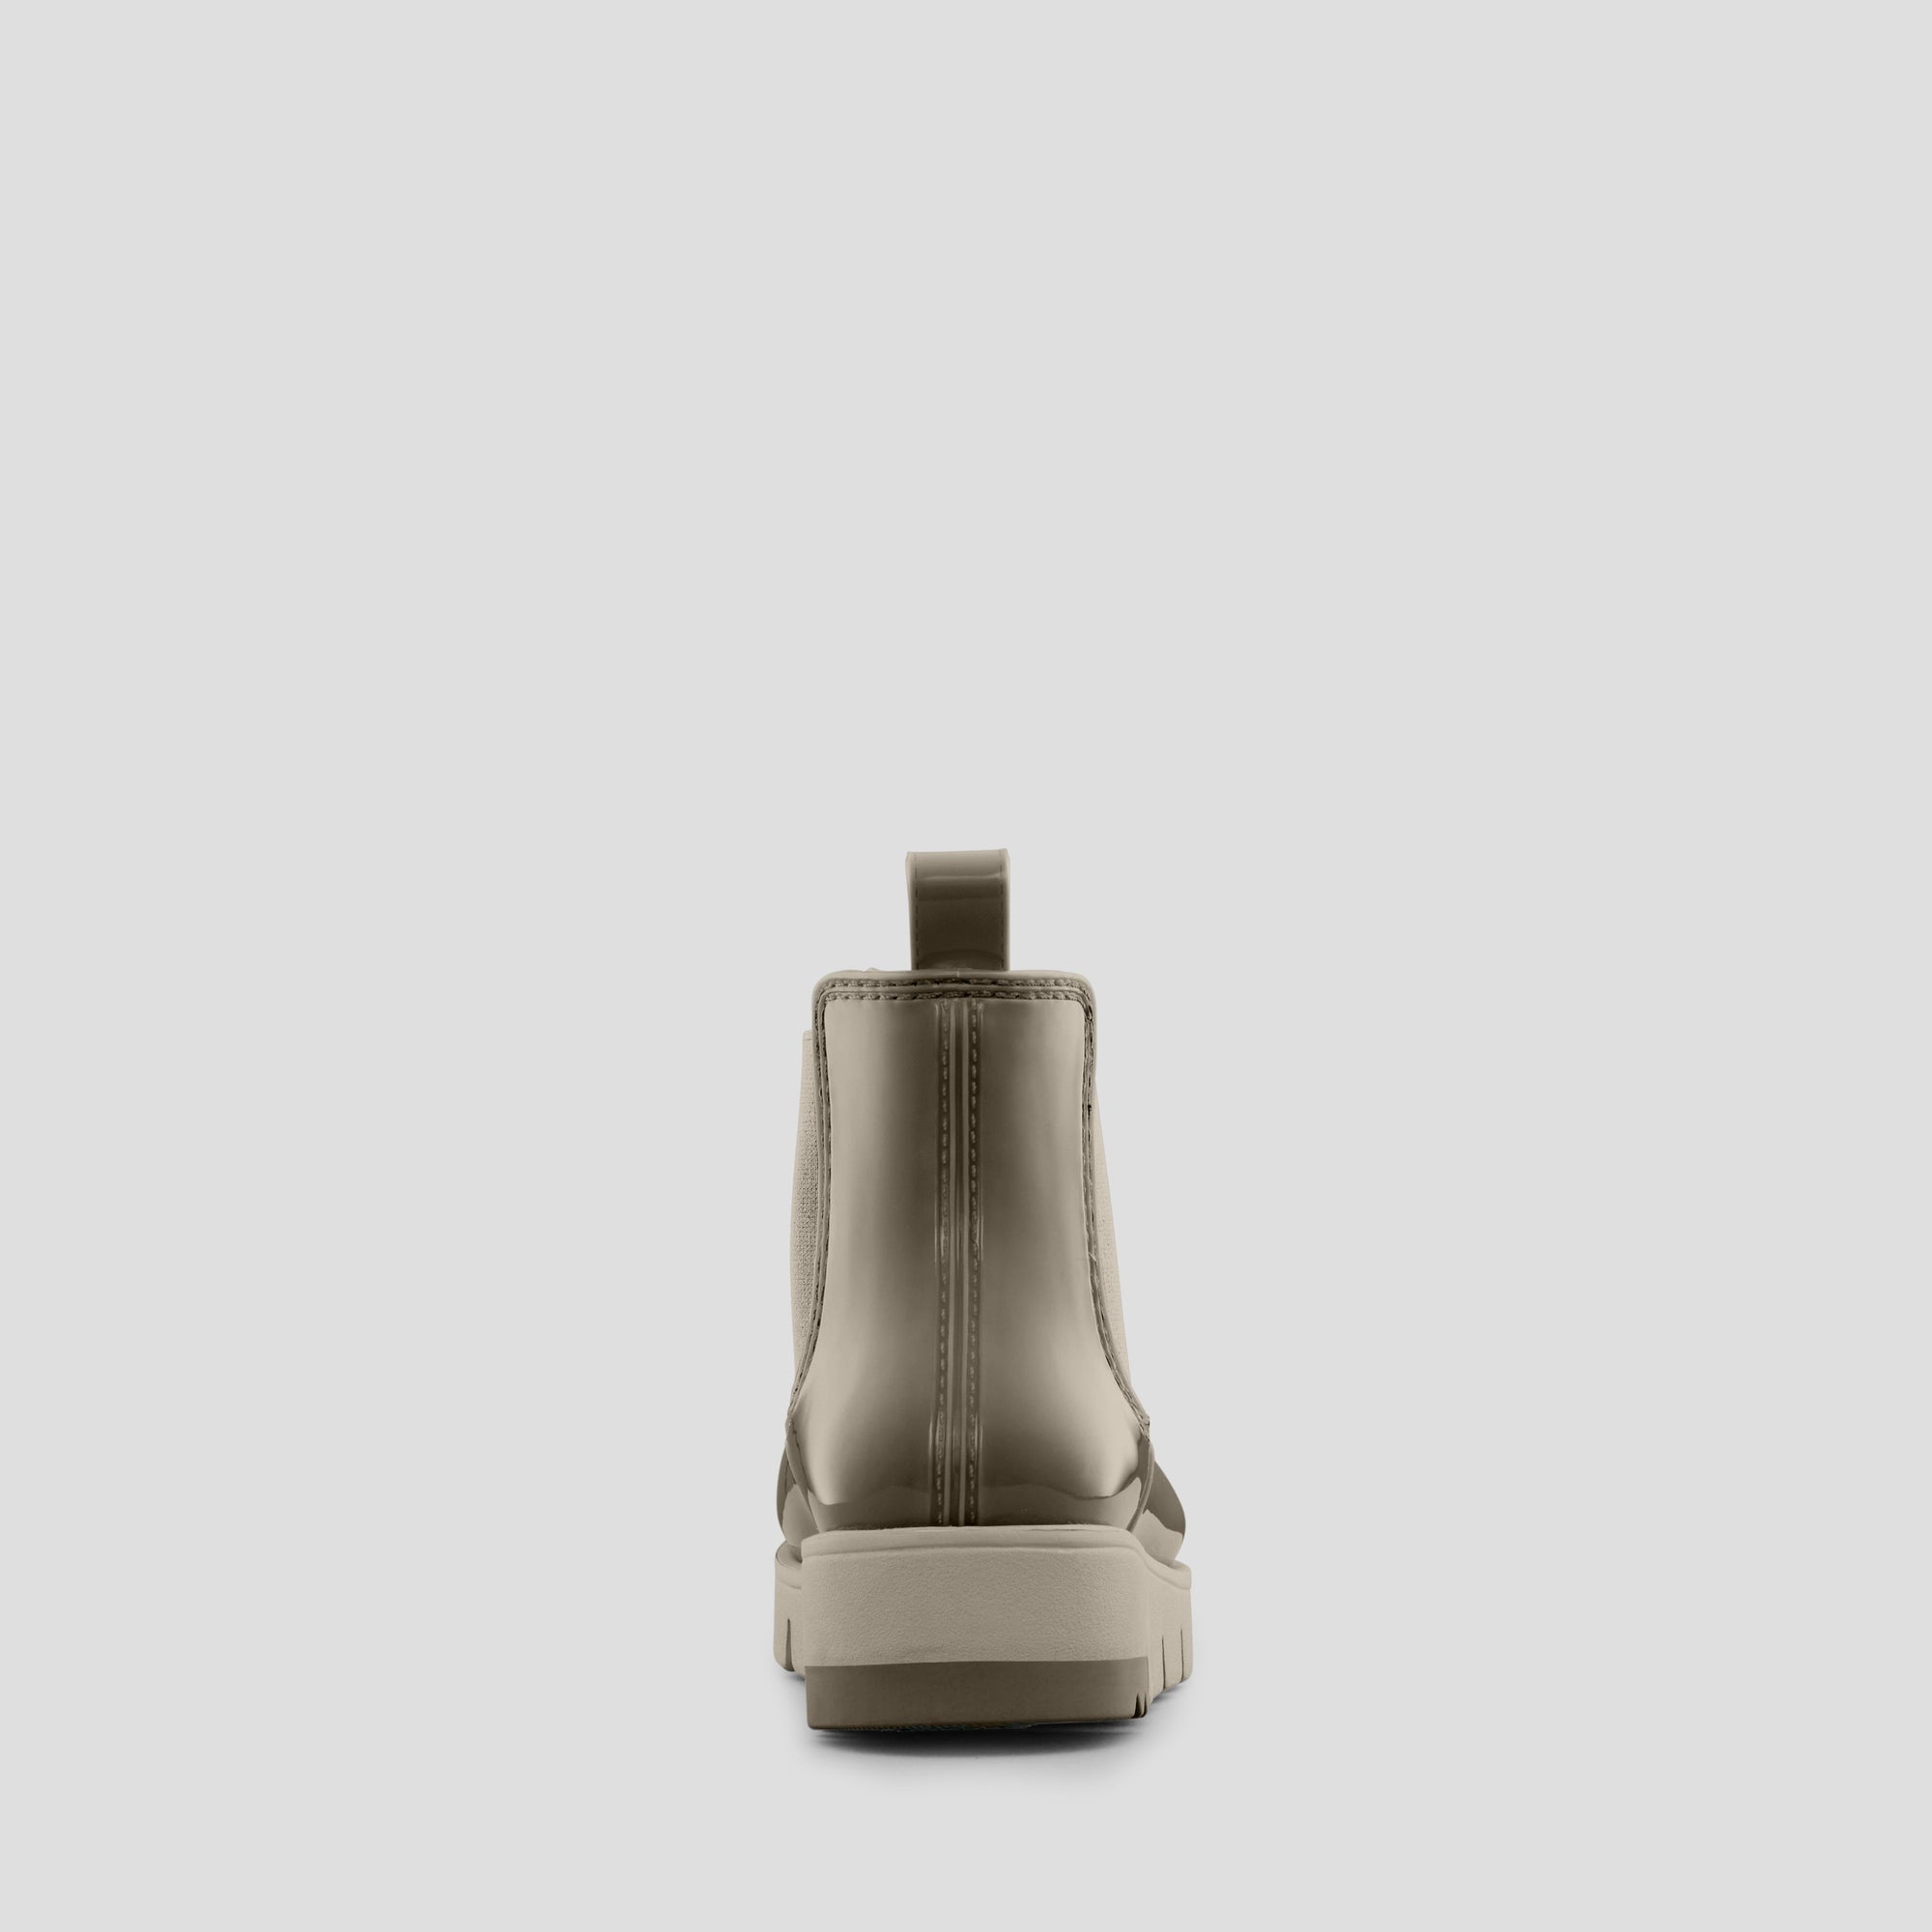 Firenze2 Chelsea Rain Boot - Color Taupe